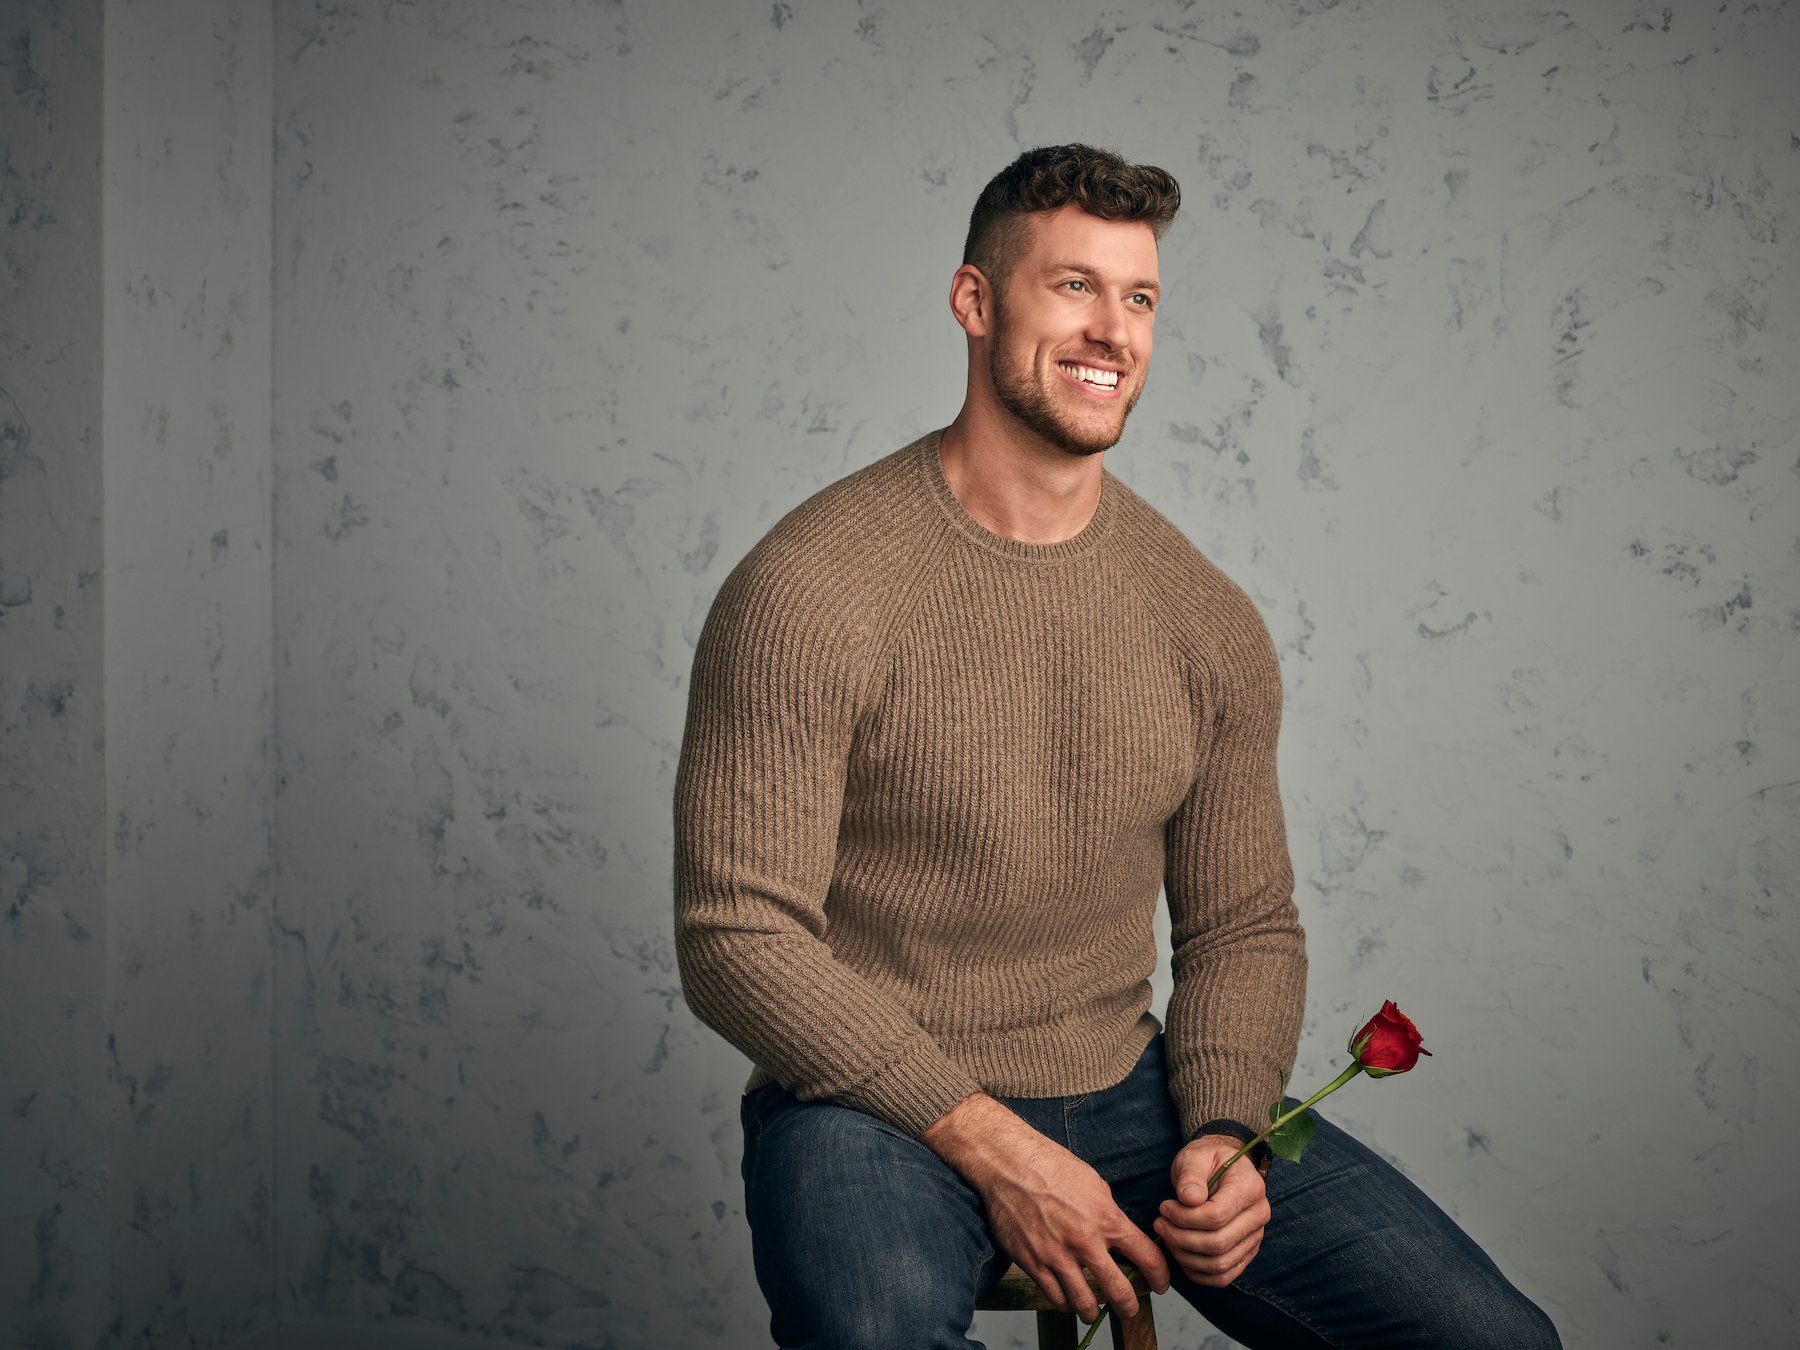 Clayton Echard, 'The Bachelor,' smiling while sitting down and holding a rose